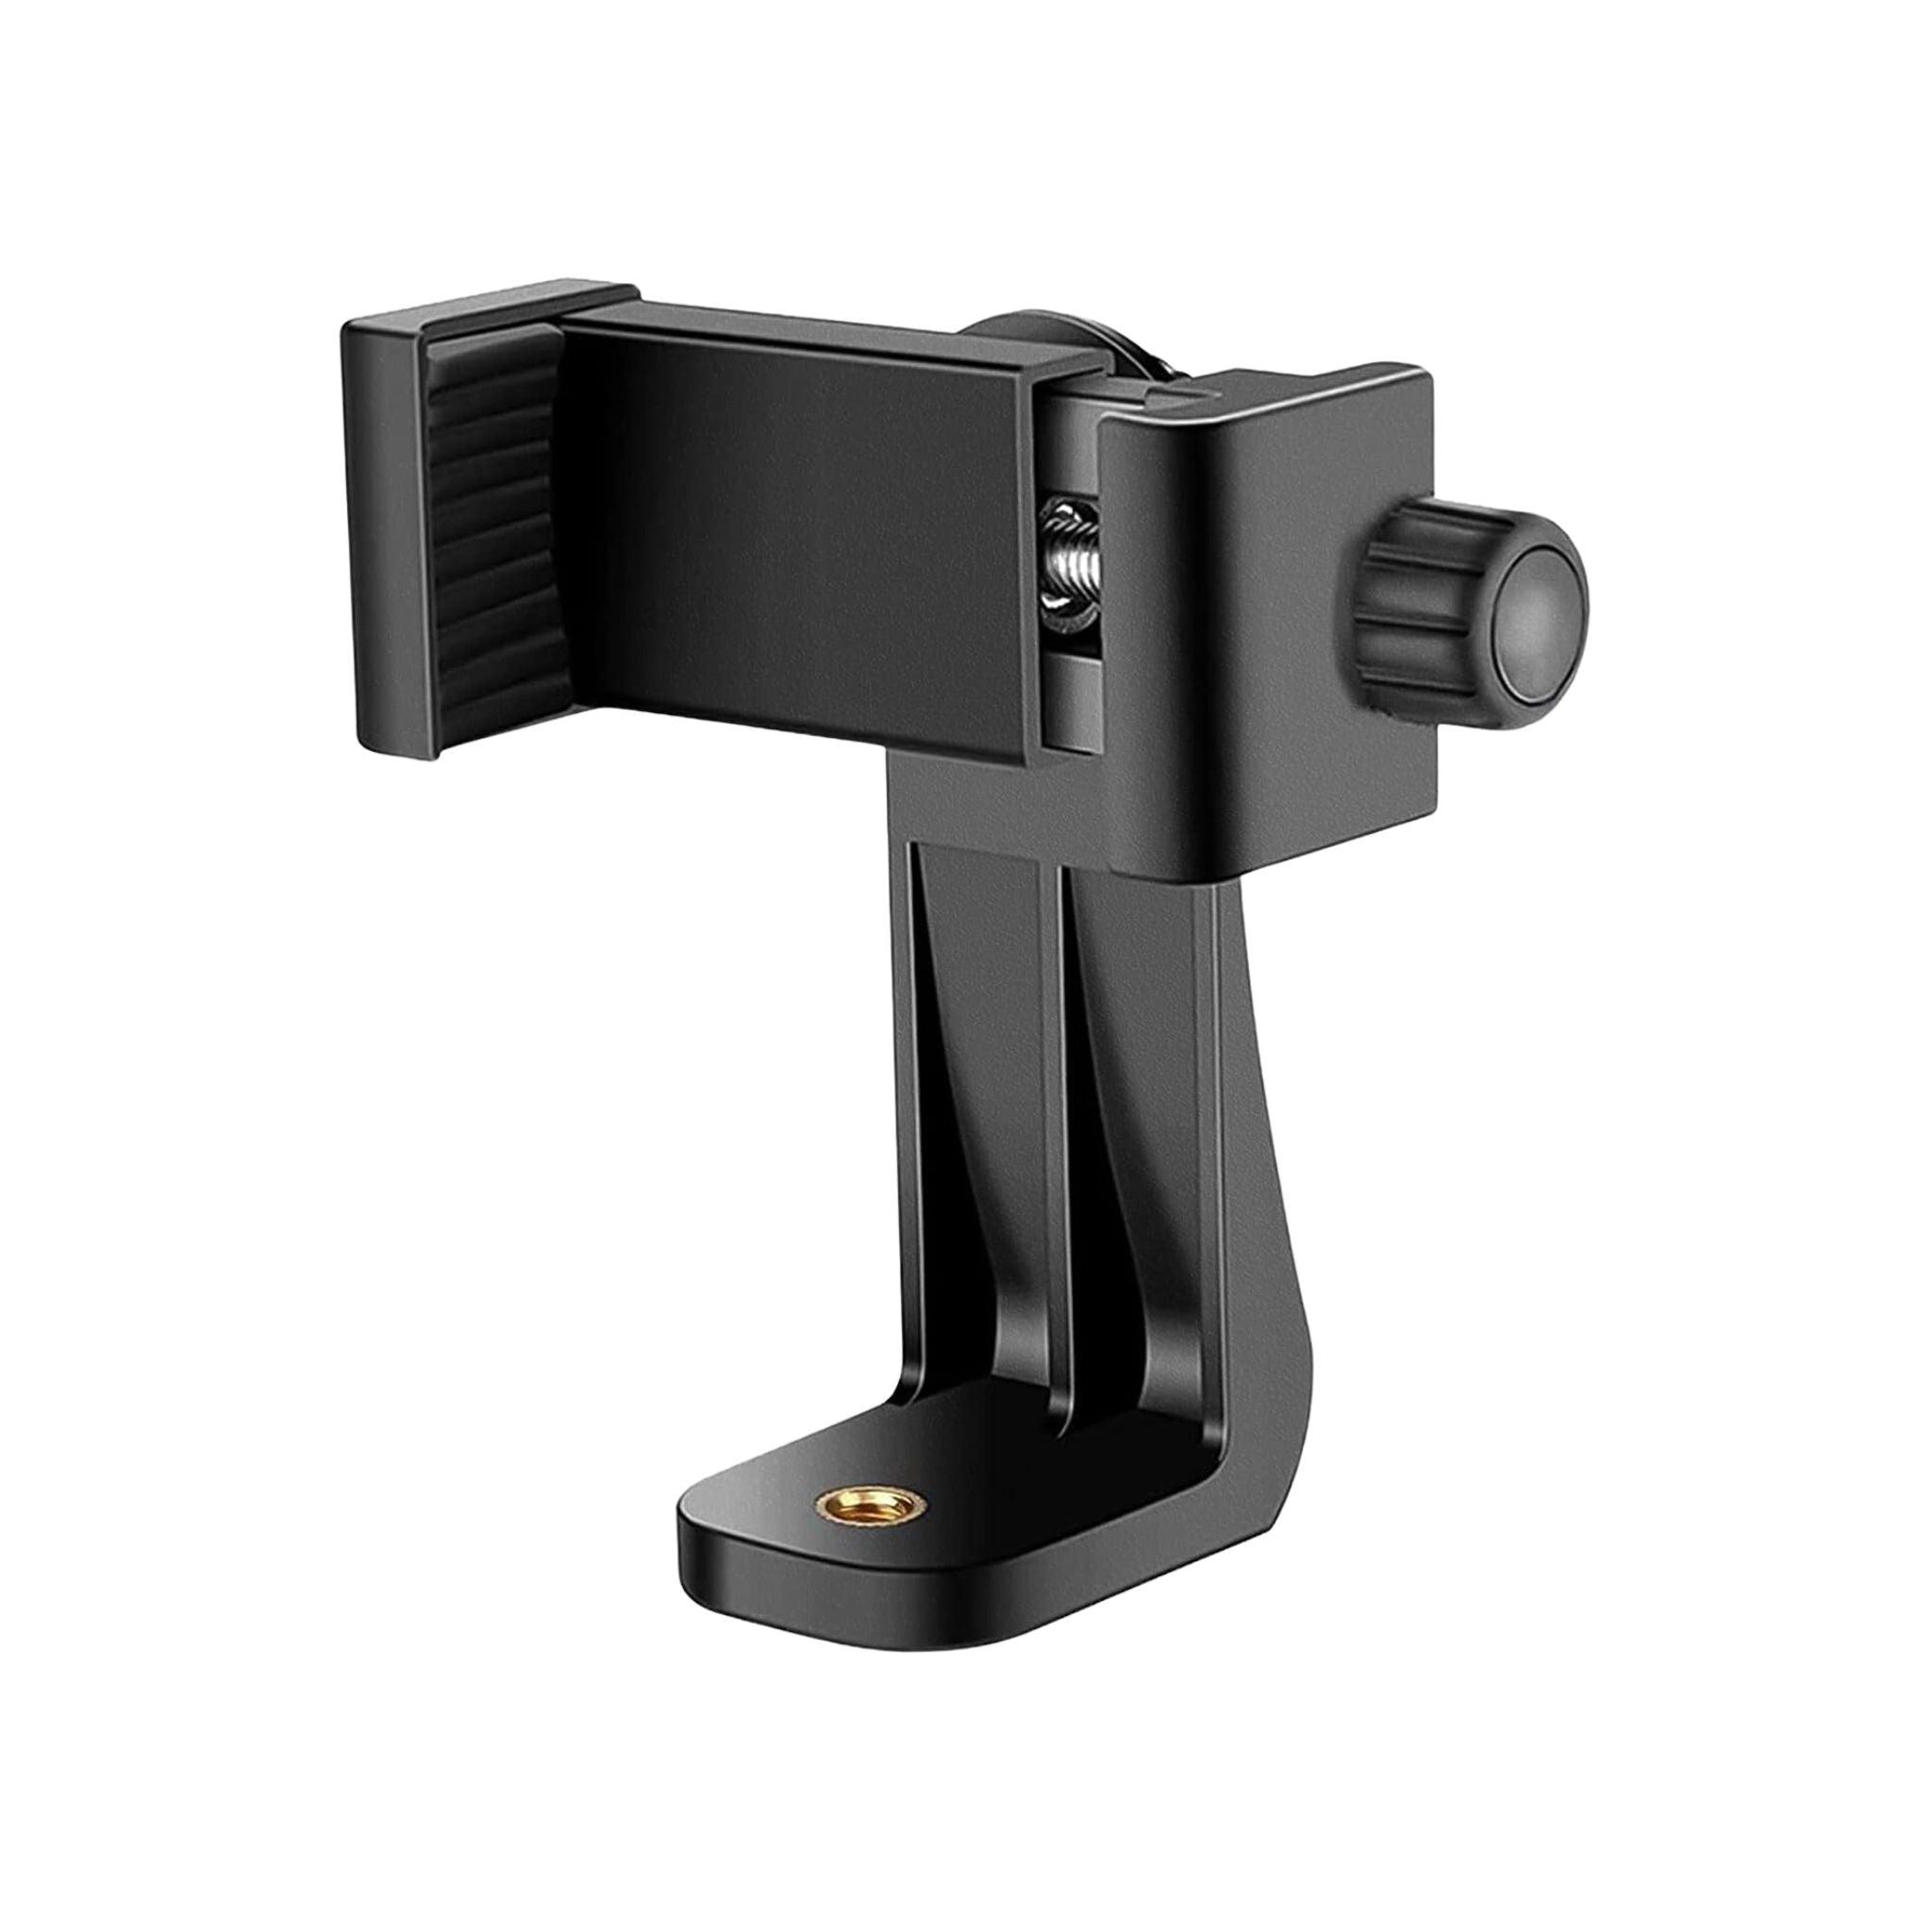 Tripod Stand for Mobile Phone - The Beauty House Shop